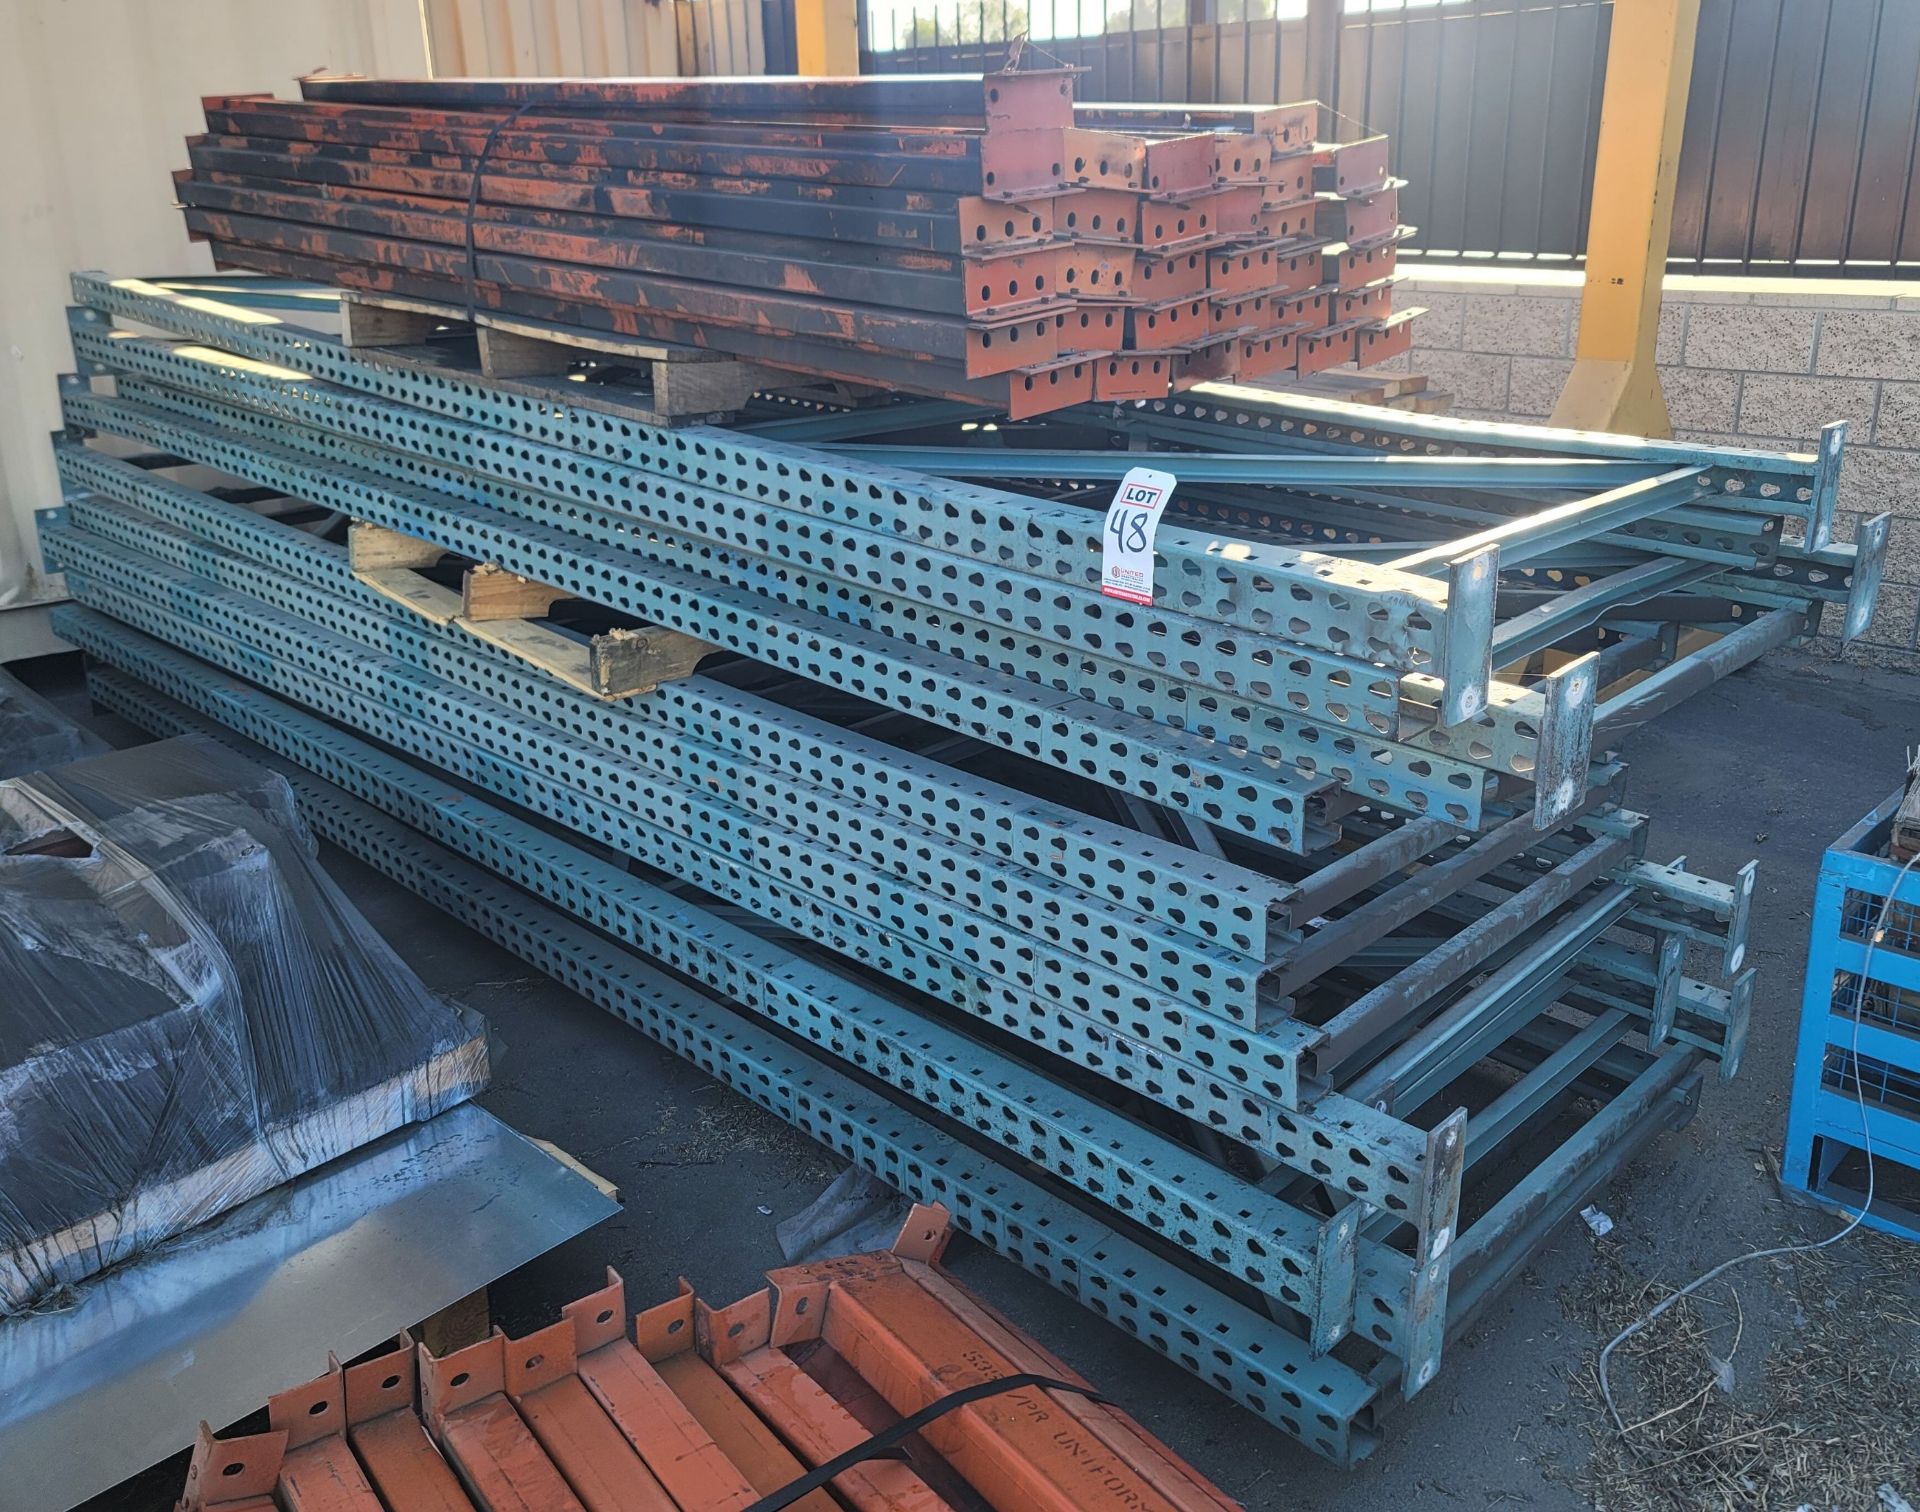 LOT - STACK OF PALLET RACKING, TO INCLUDE 12' X 40" UPRIGHTS, 8' BEAMS, (3) PALLETS OF 2" X 6" X 36"